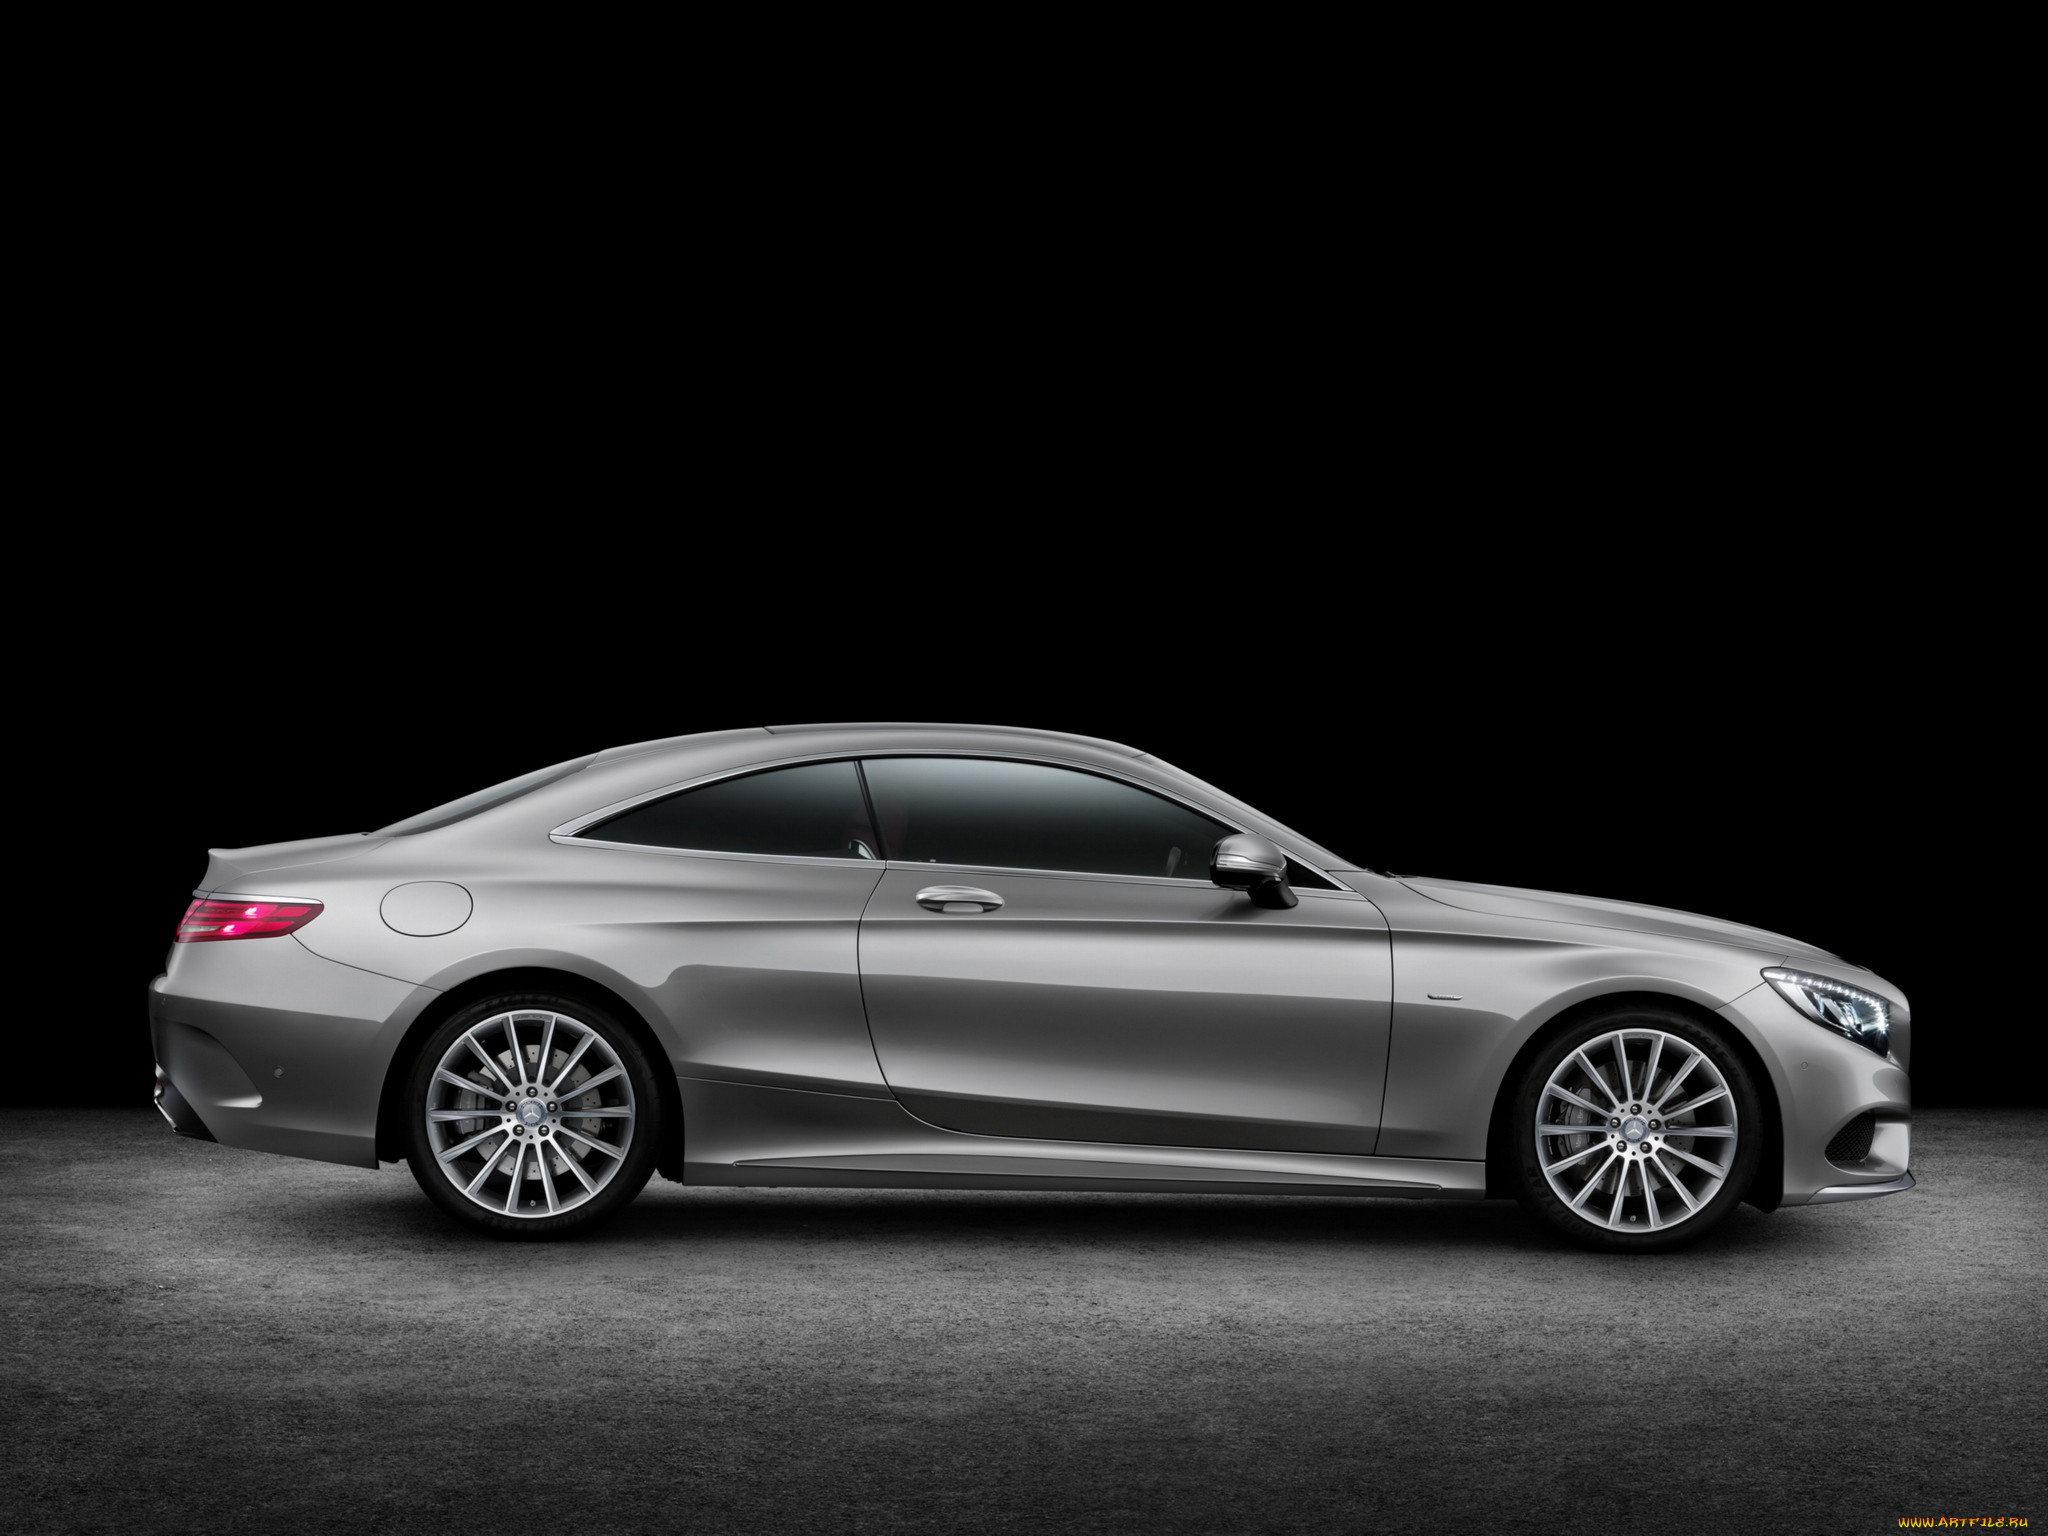 , mercedes-benz, edition, coupe, s, 500, package, 217, 2014, sports, 1, c, amg, 4matic